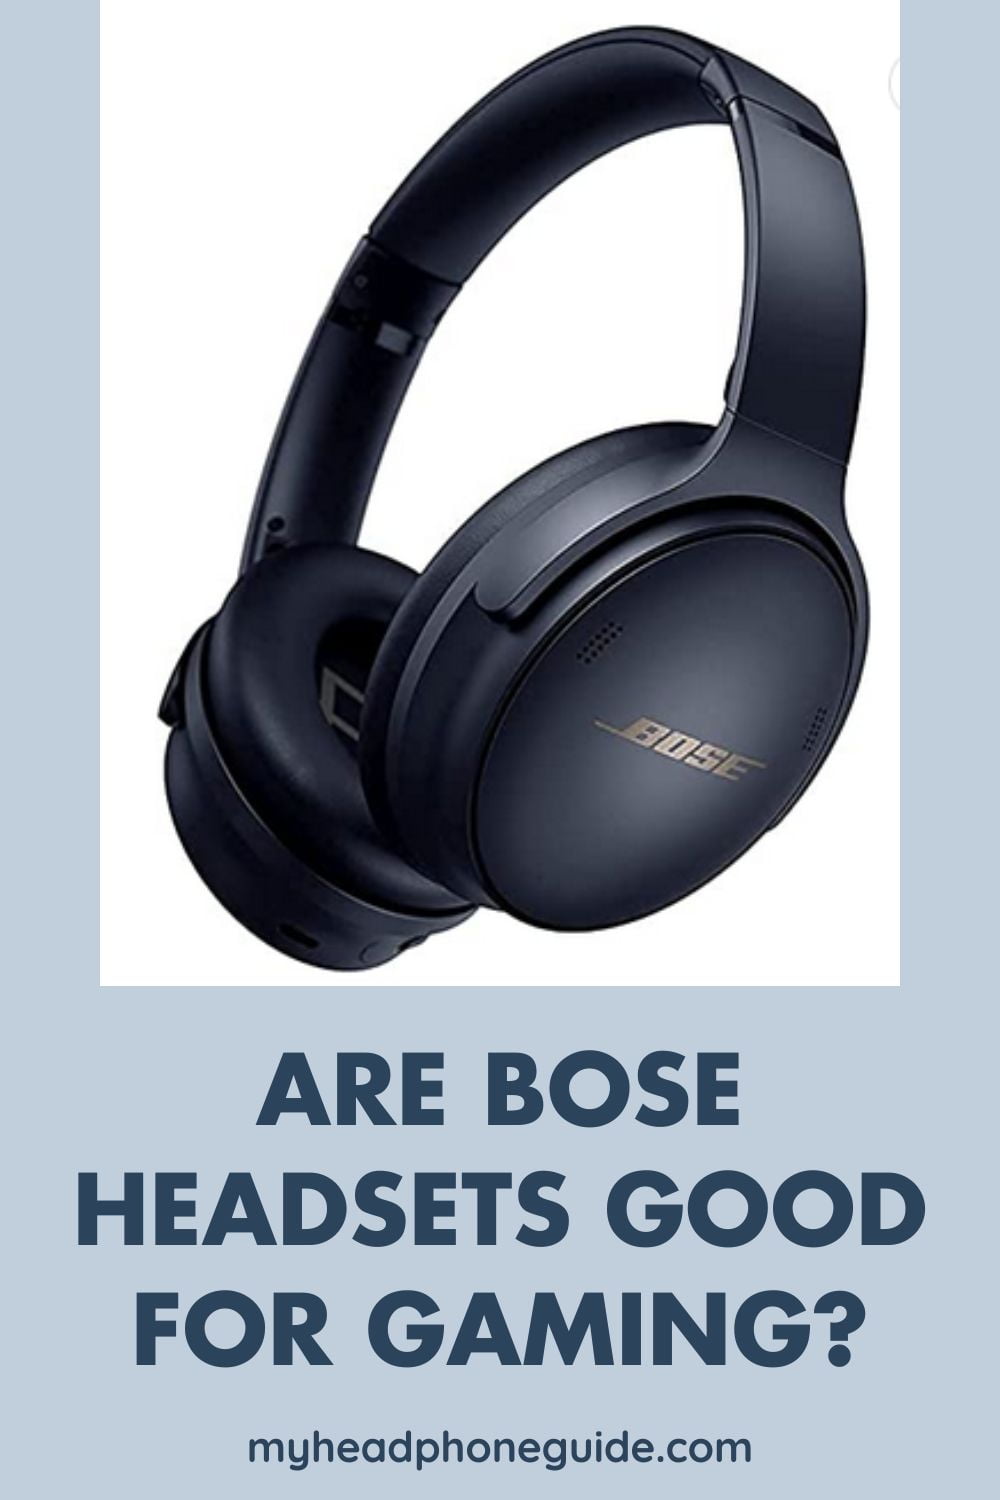 Are Bose Headsets Good for Gaming?